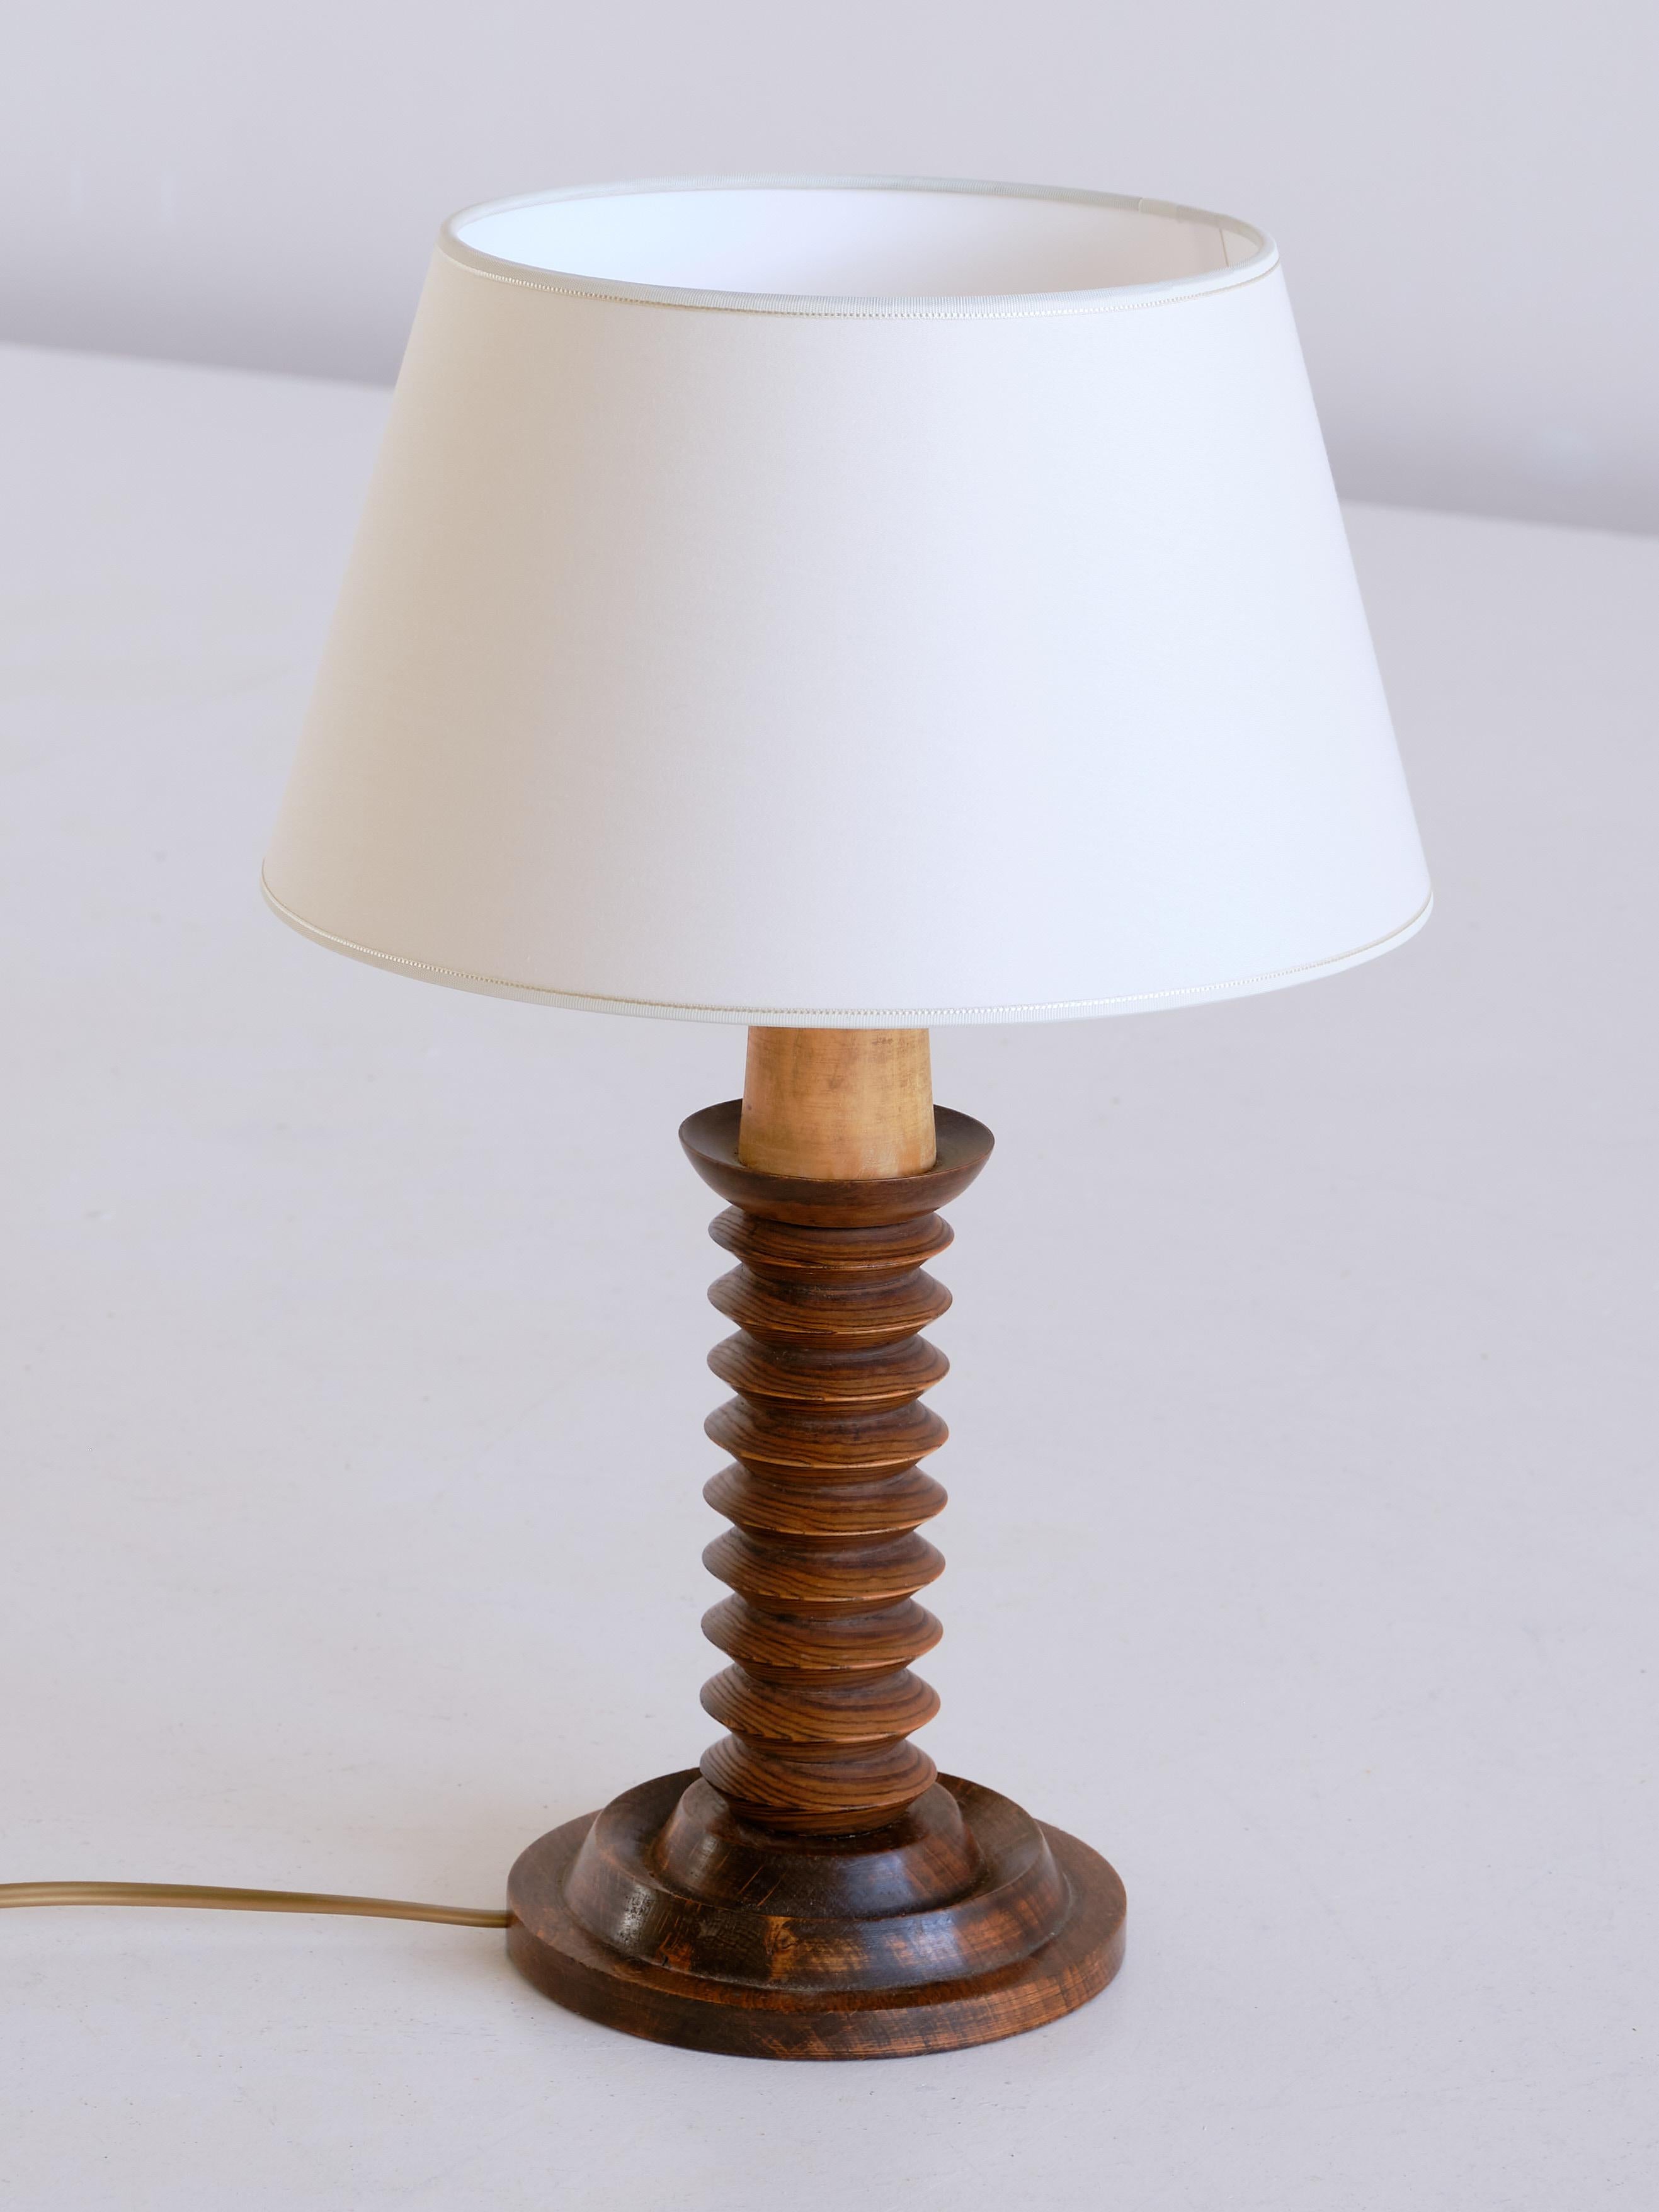 This rustic and elegant table lamp was produced in France in the 1950s. The lamp is made of dark stained oak wood and consists of a circular base and a carved stem in a stacked disc shape.
The new ivory shade distributes a soft and pleasant light.